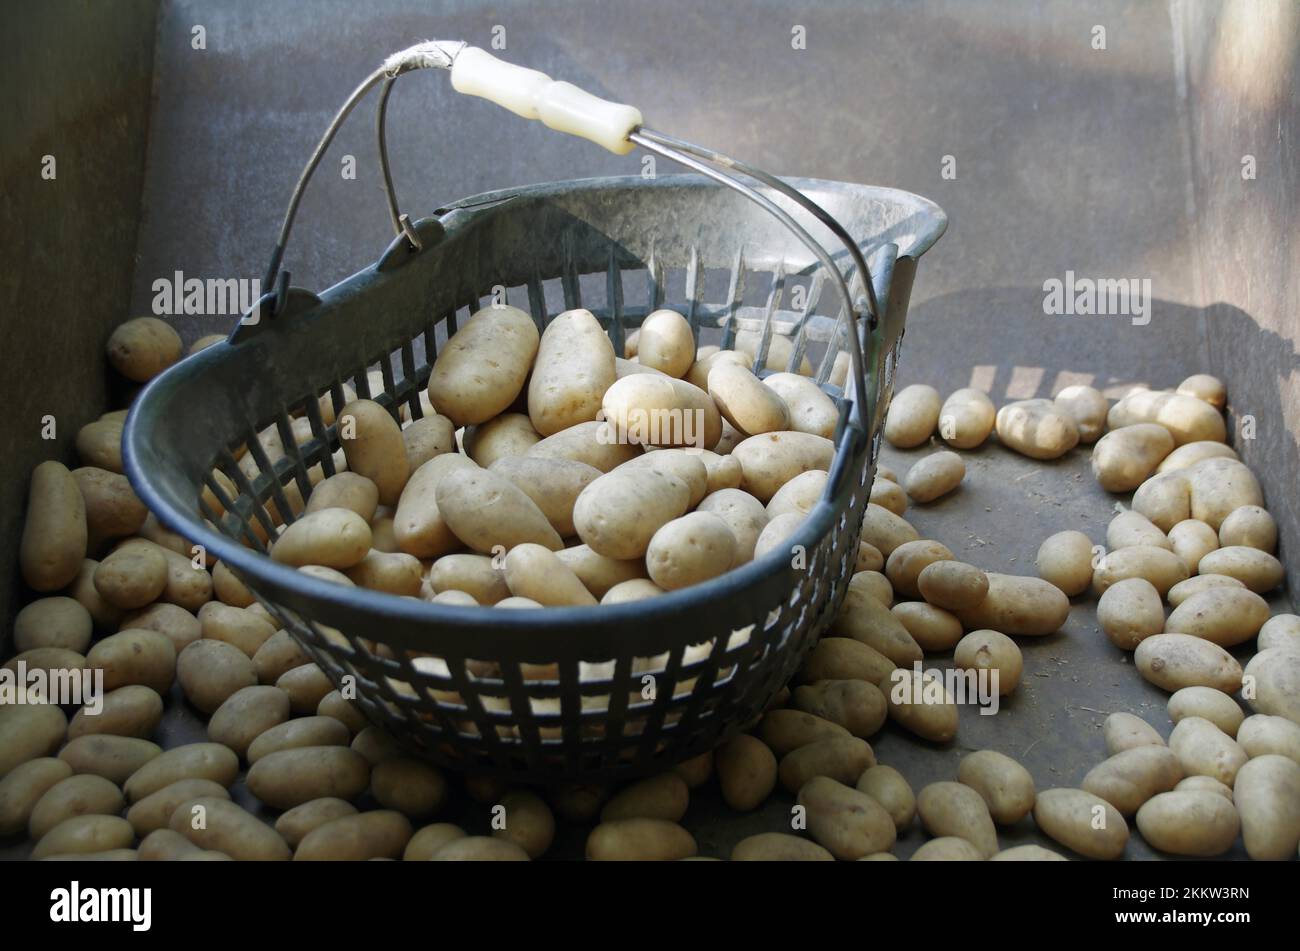 Potatoes (Solanum tuberosum), freshly harvested potatoes lie partly in a basket and others spread around it Stock Photo